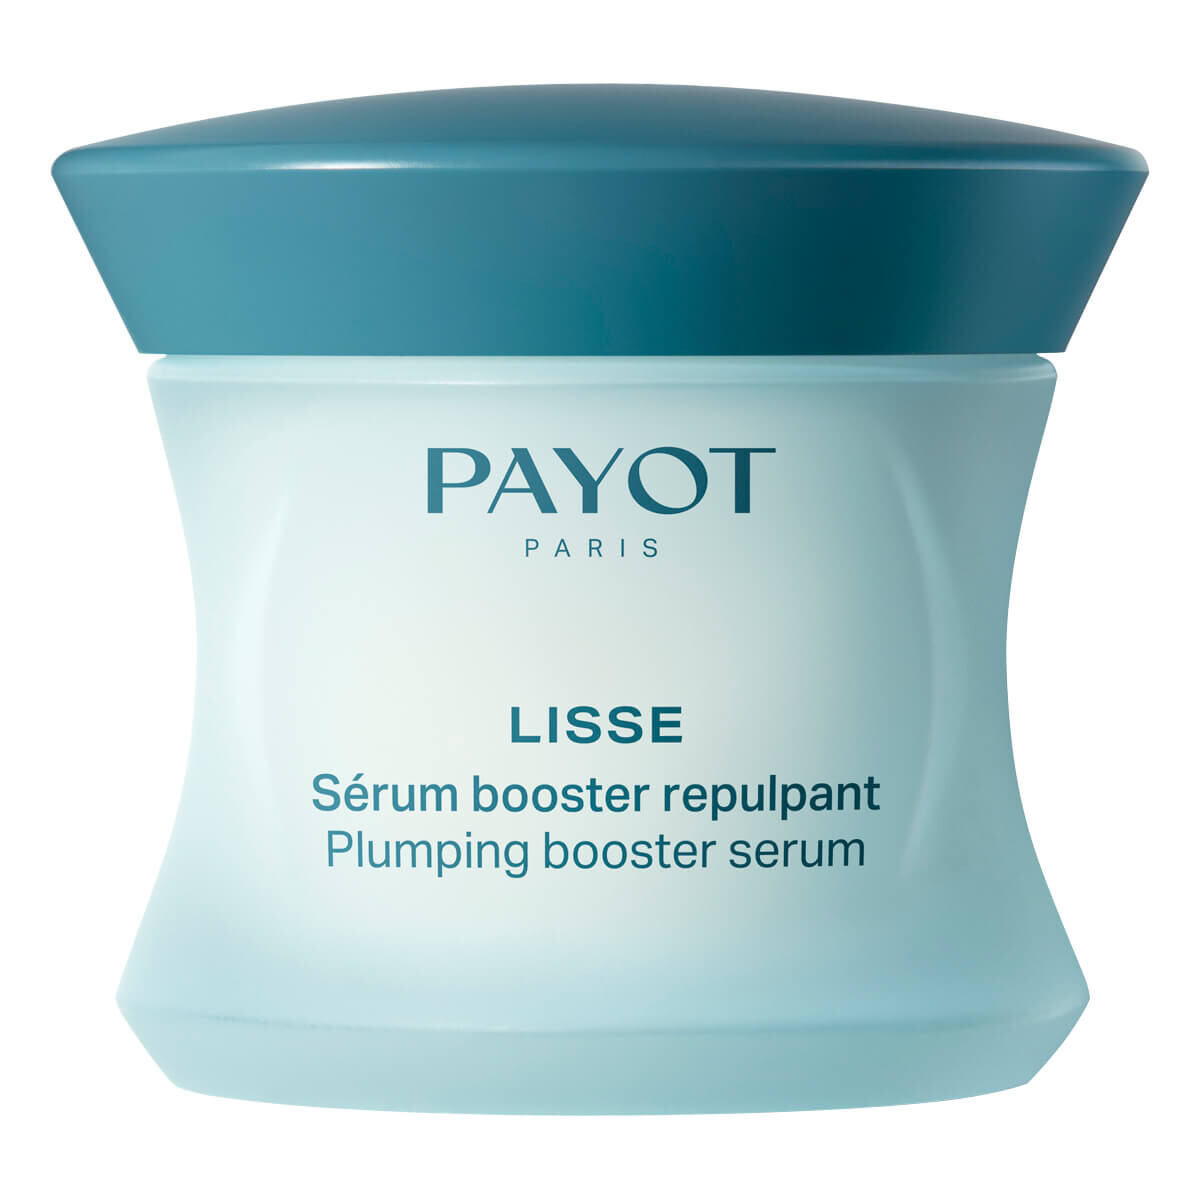 Se Payot Plumping Booster Serum, Lisse, 50 ml. hos Proshave